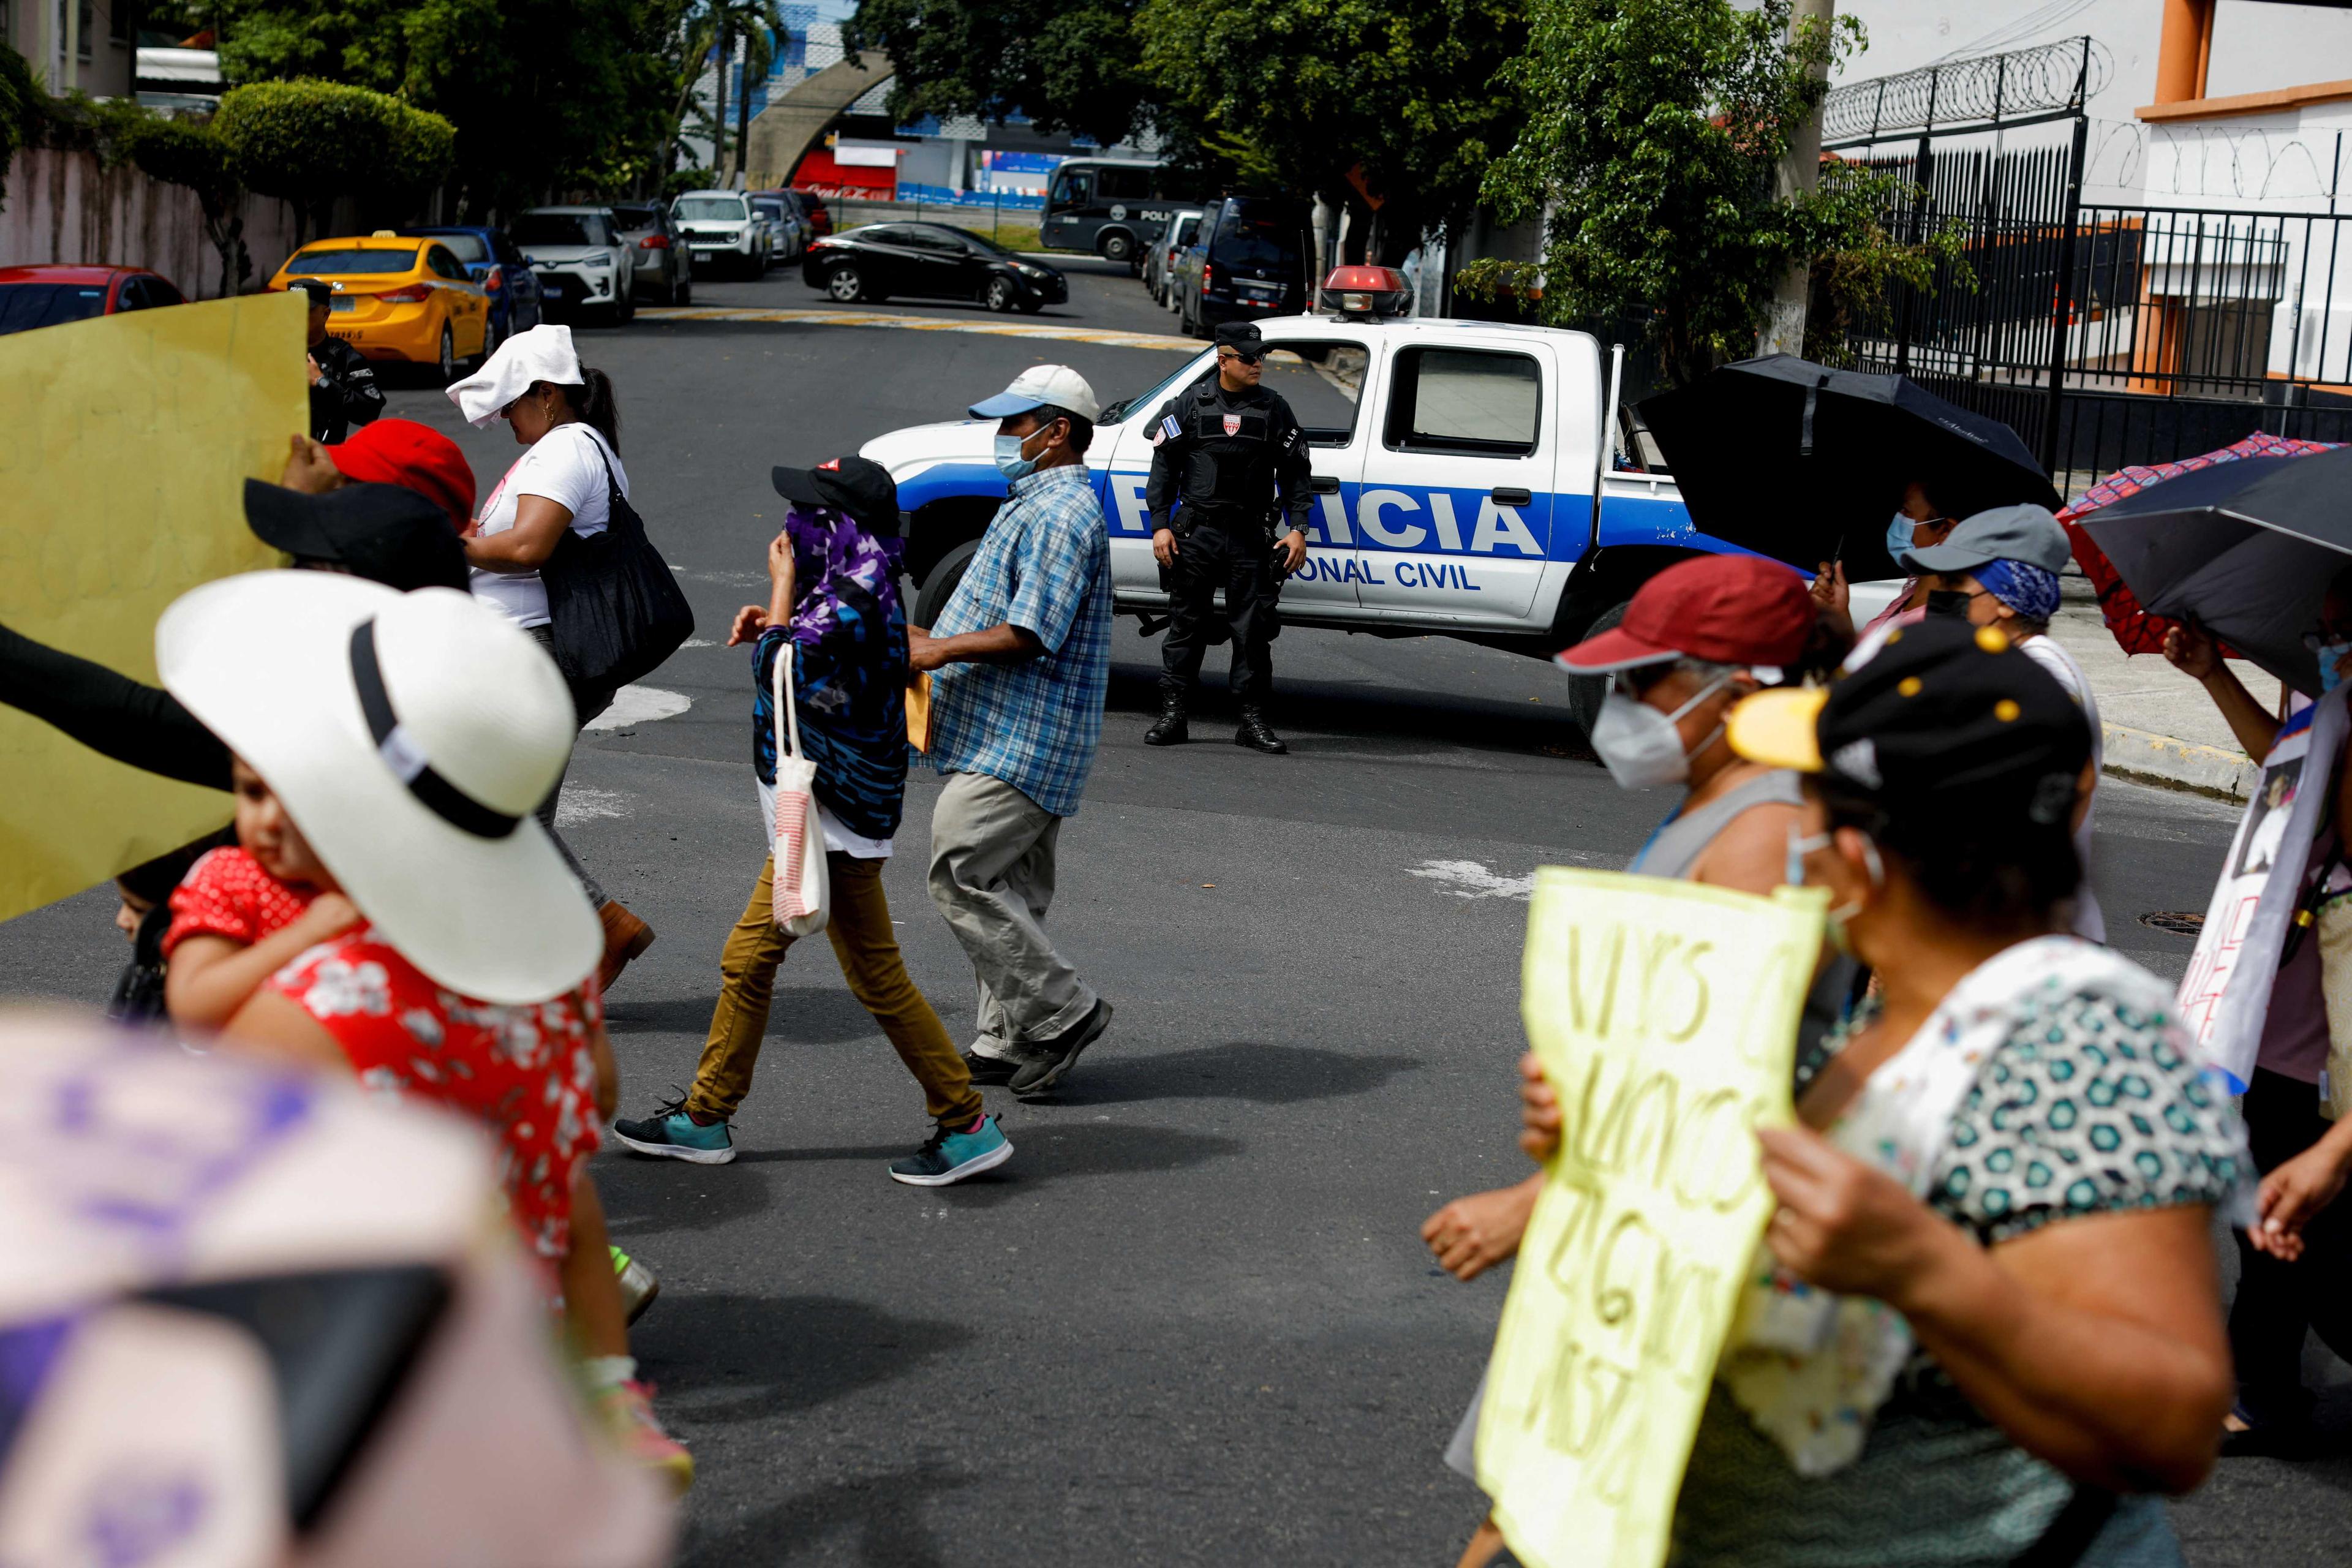 People participate in a protest to demand the release of relatives detained during the government's state of emergency to curb gang violence, in San Salvador, El Salvador July 7. Photo: Reuters